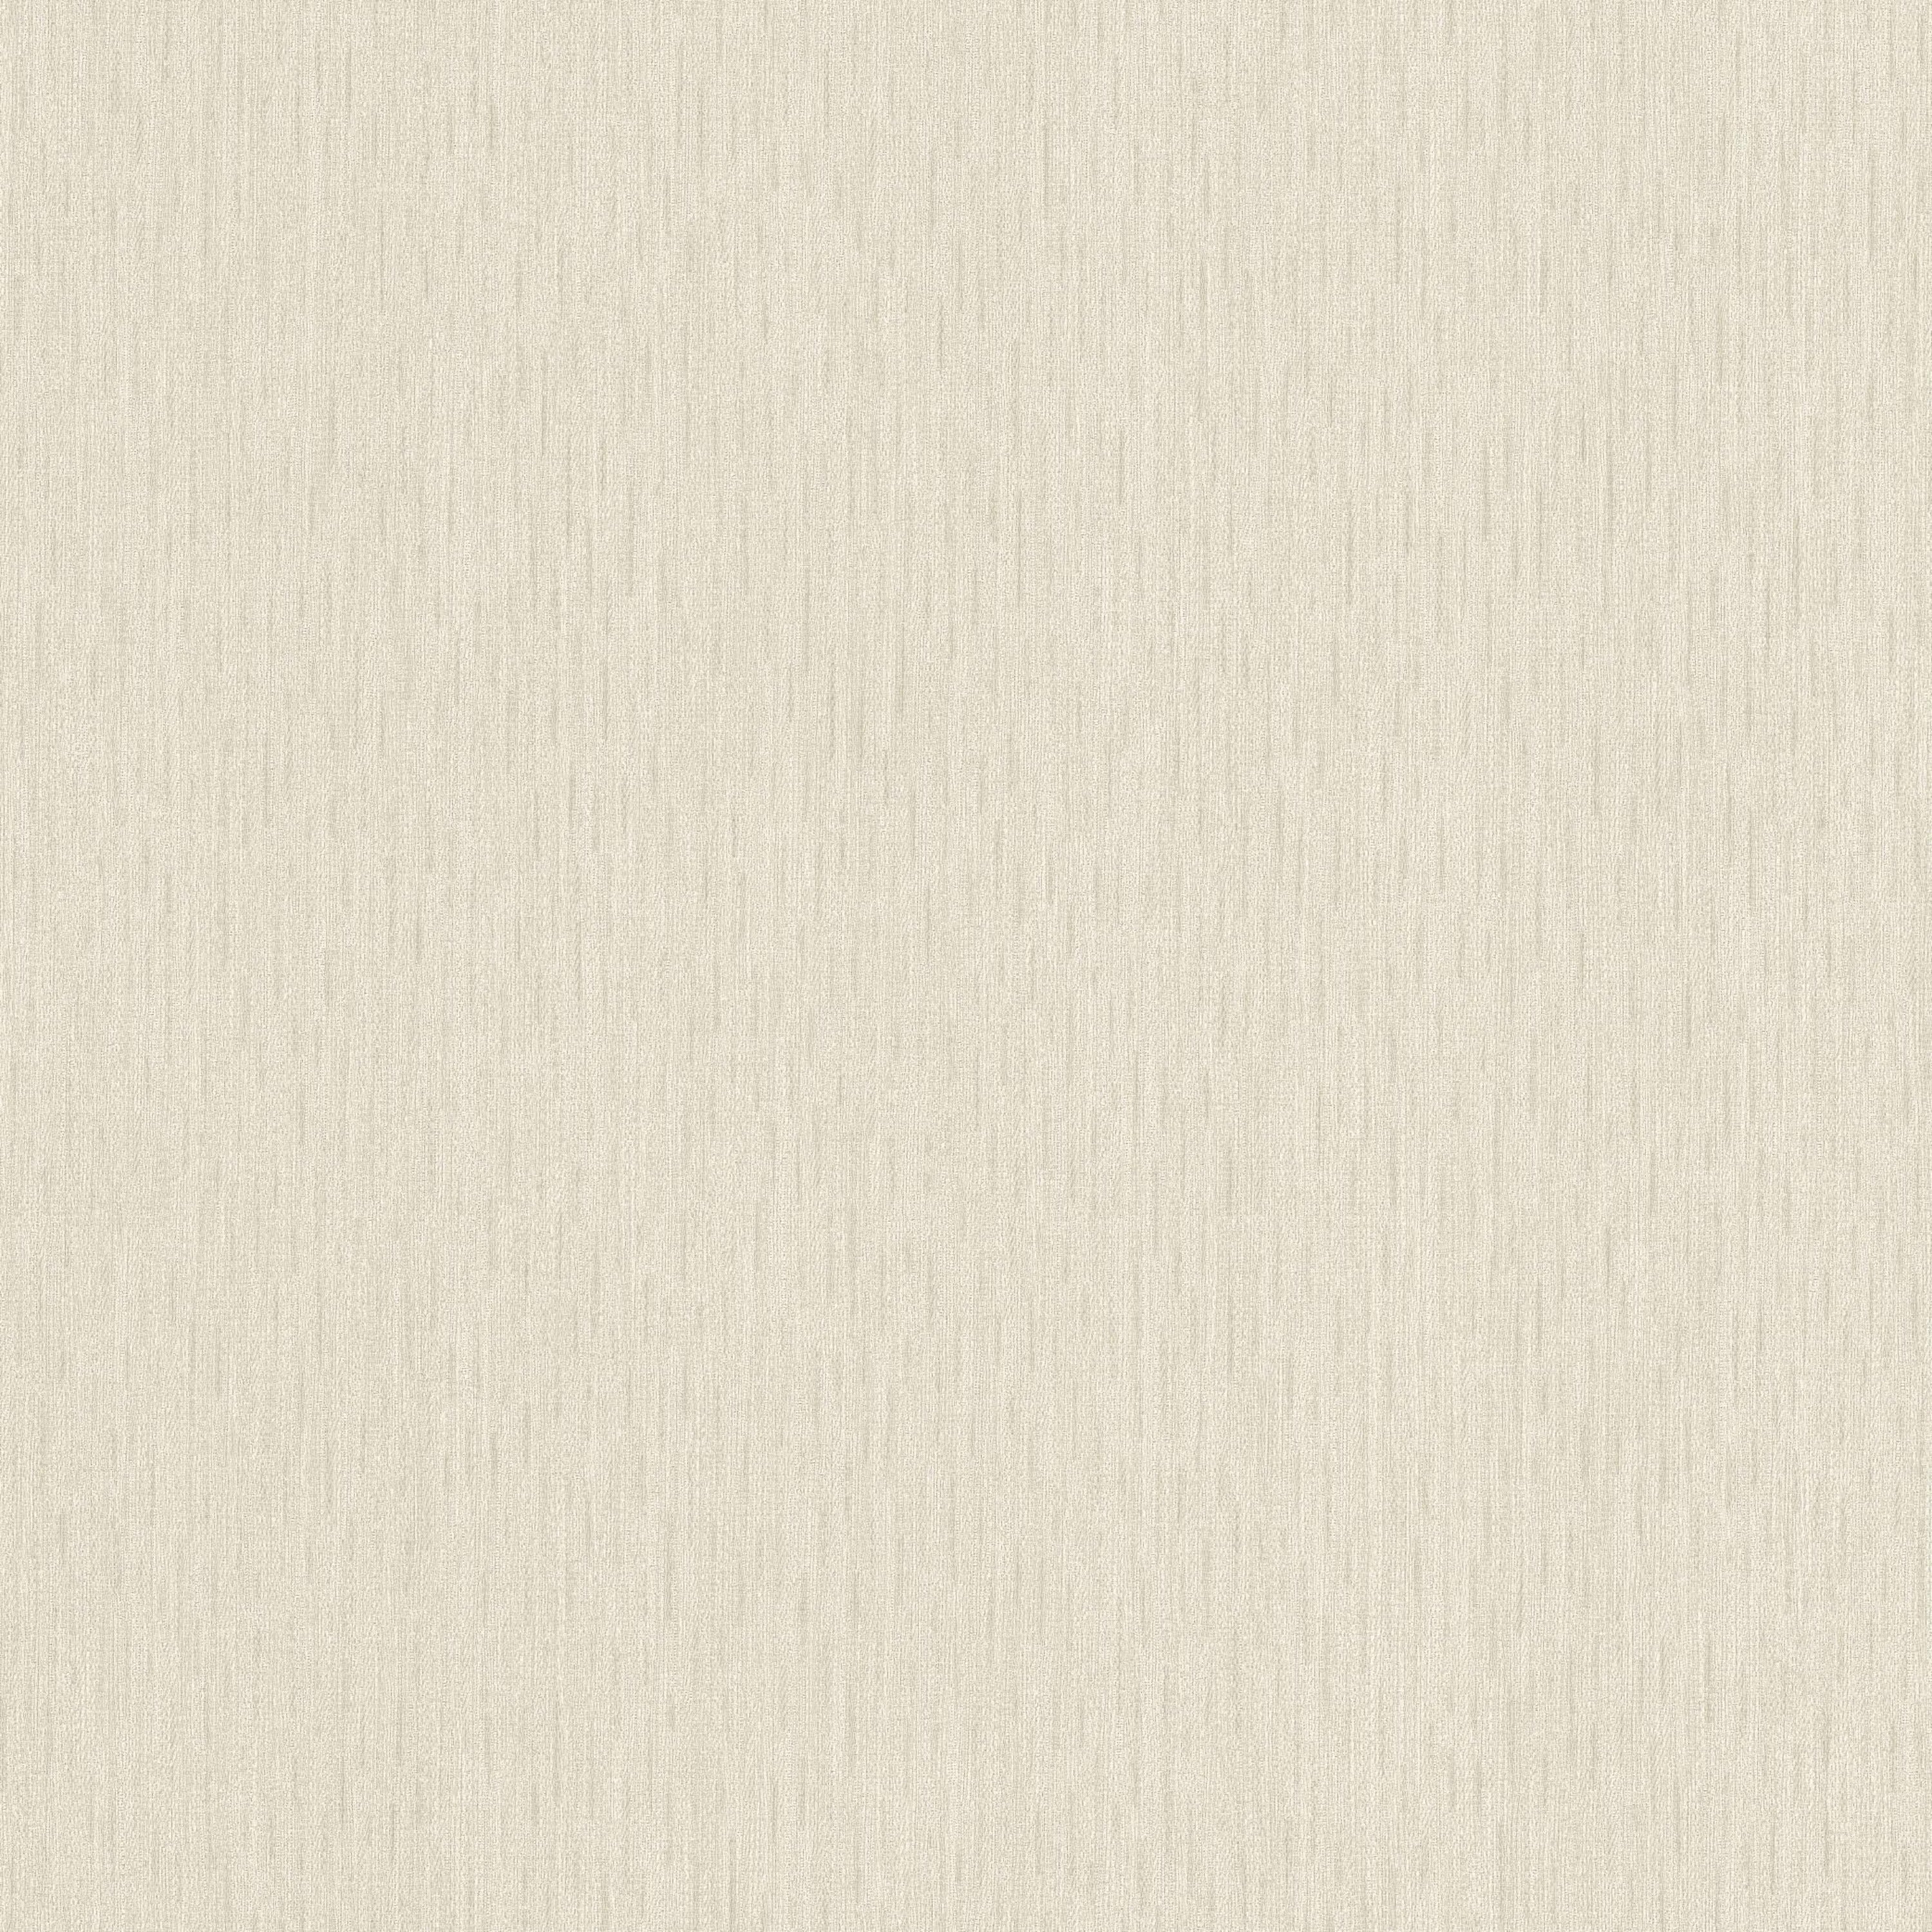 Beige Cream Background Aesthetic Images  Free Photos PNG Stickers  Wallpapers  Backgrounds  rawpixel